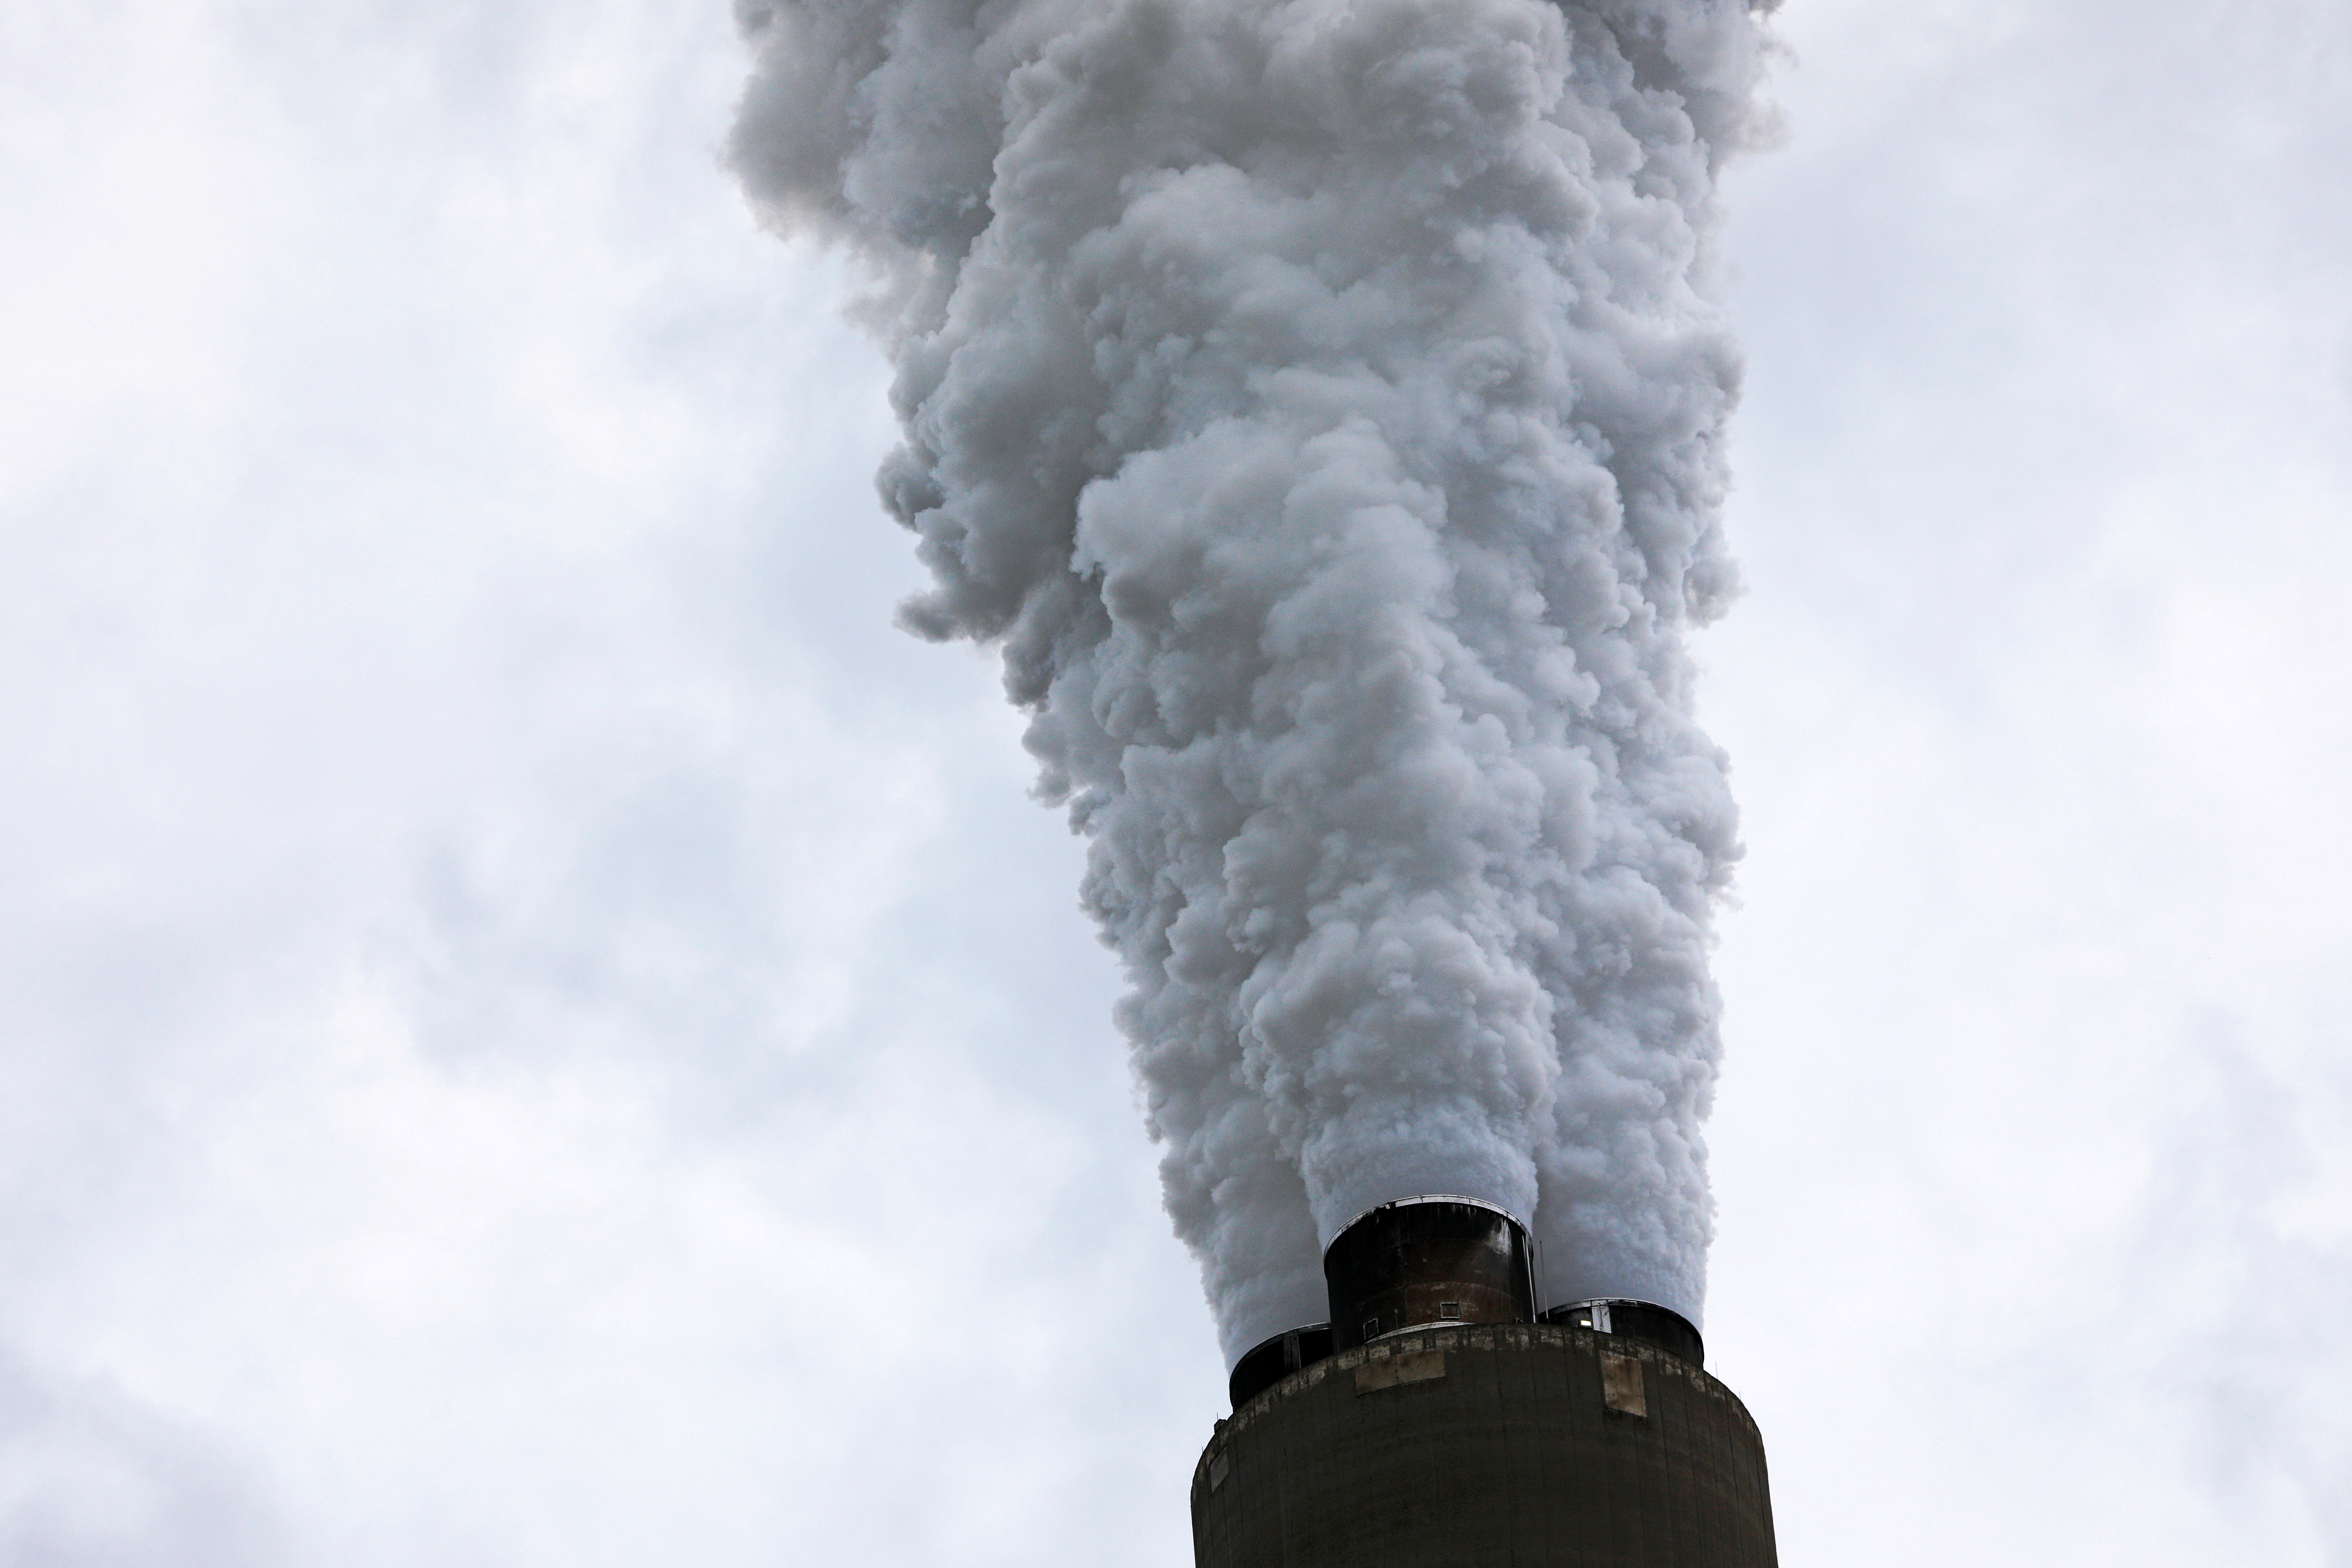 Exhaust rises from the stacks of the Harrison Power Station in Haywood